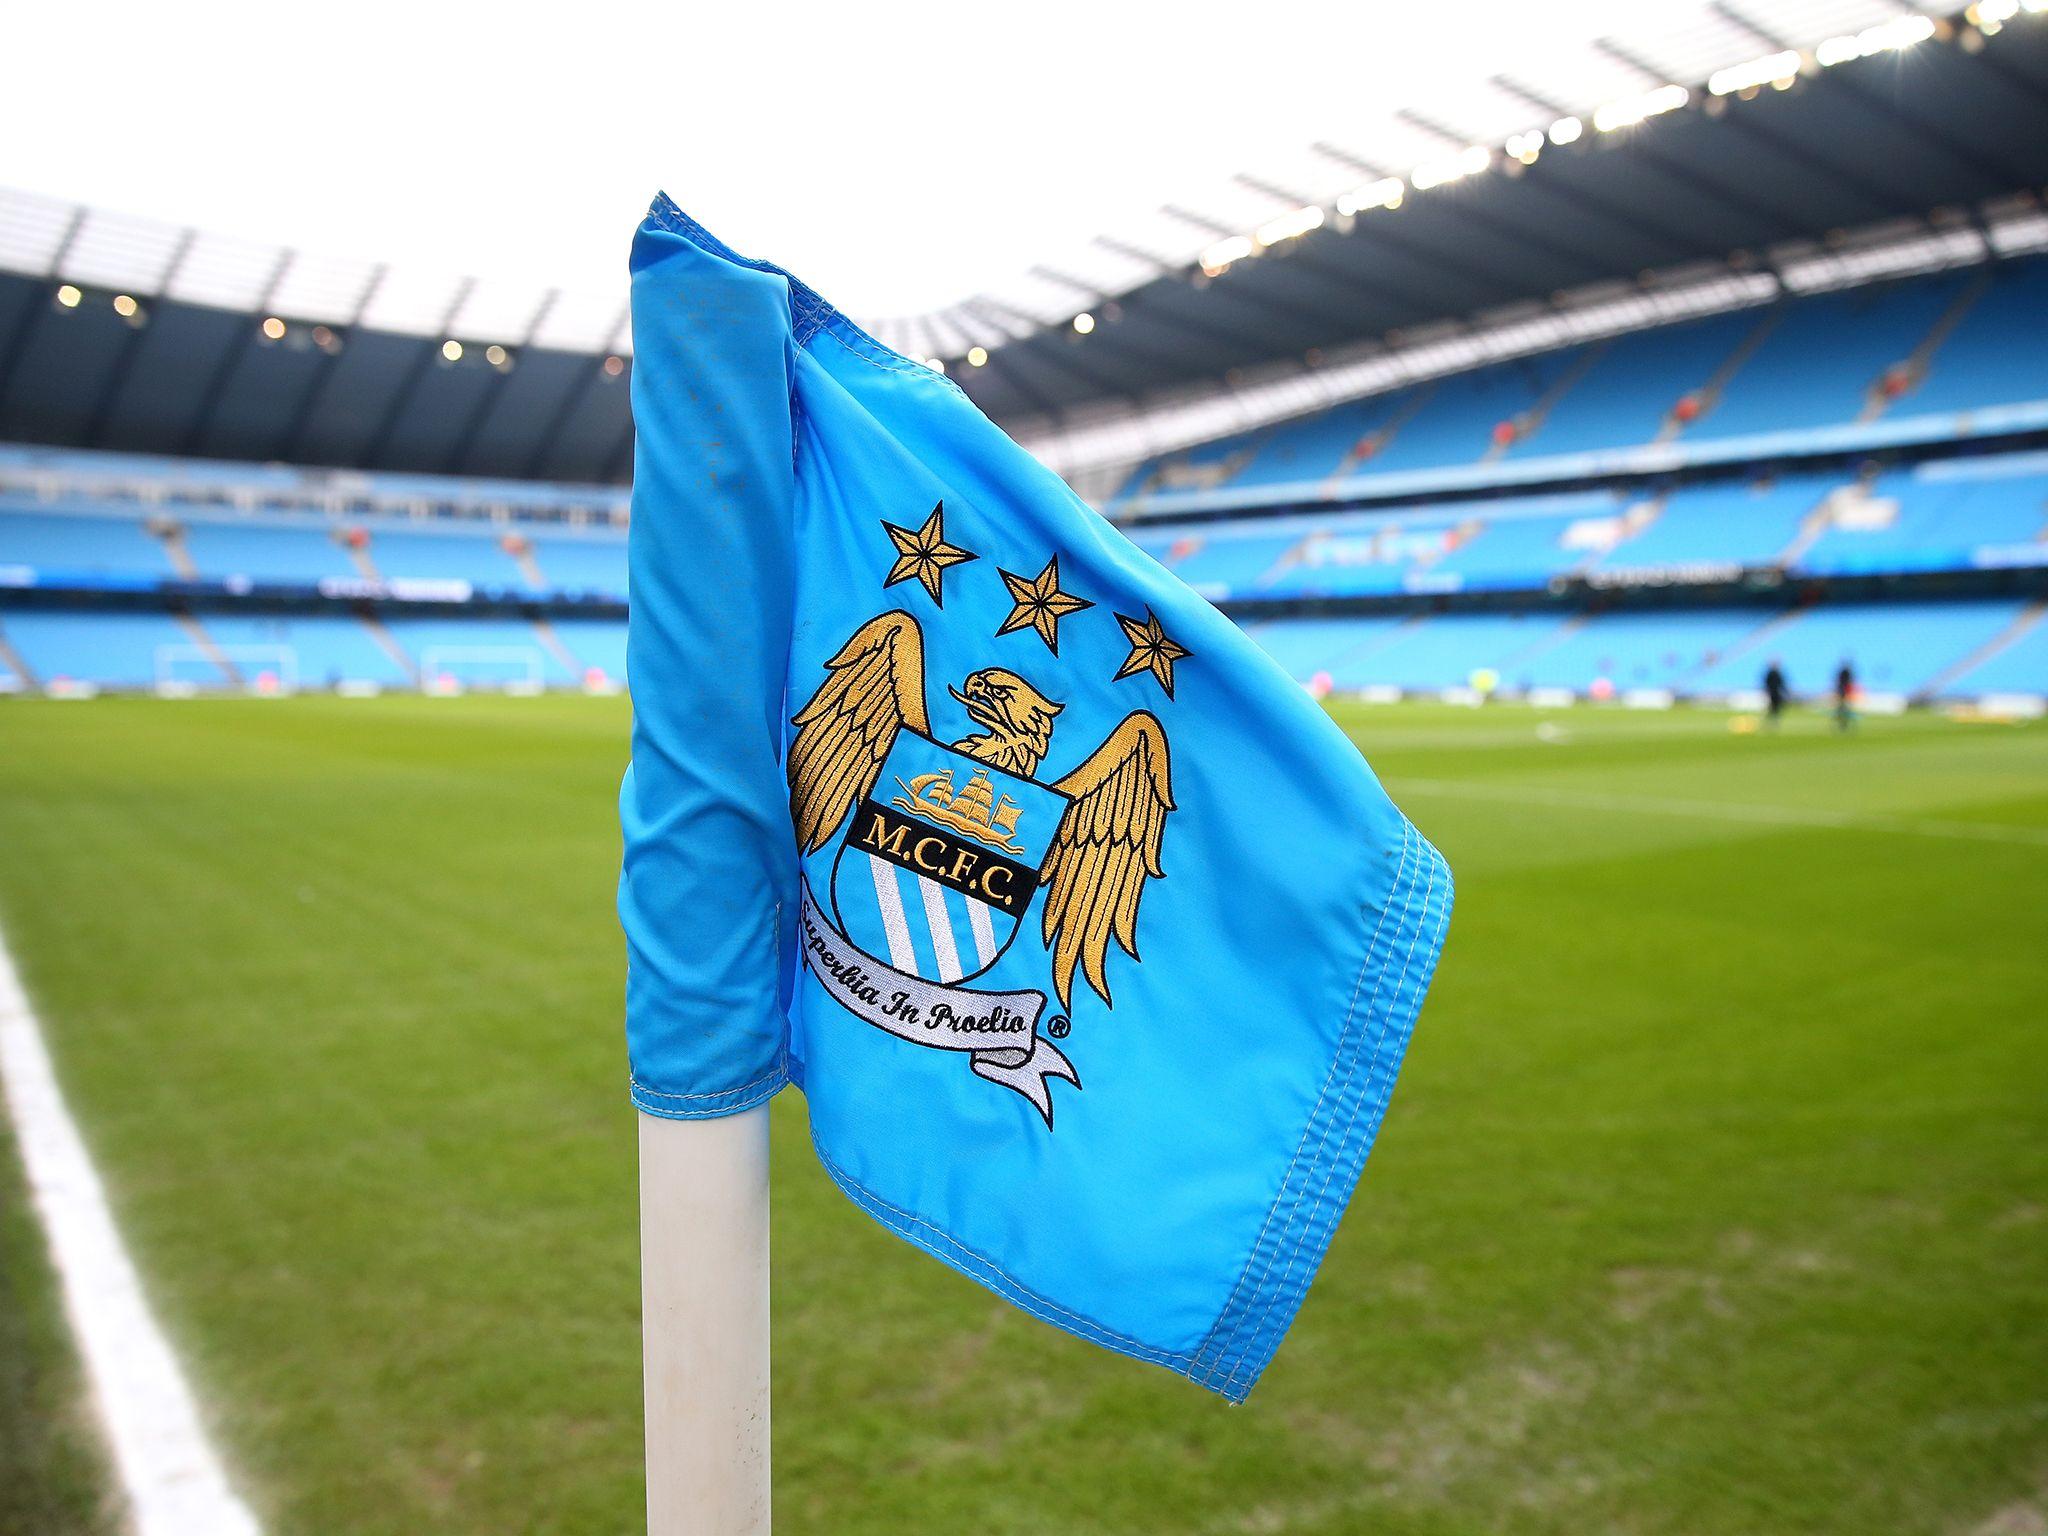 Manchester City vs Swansea! Latest score and updates